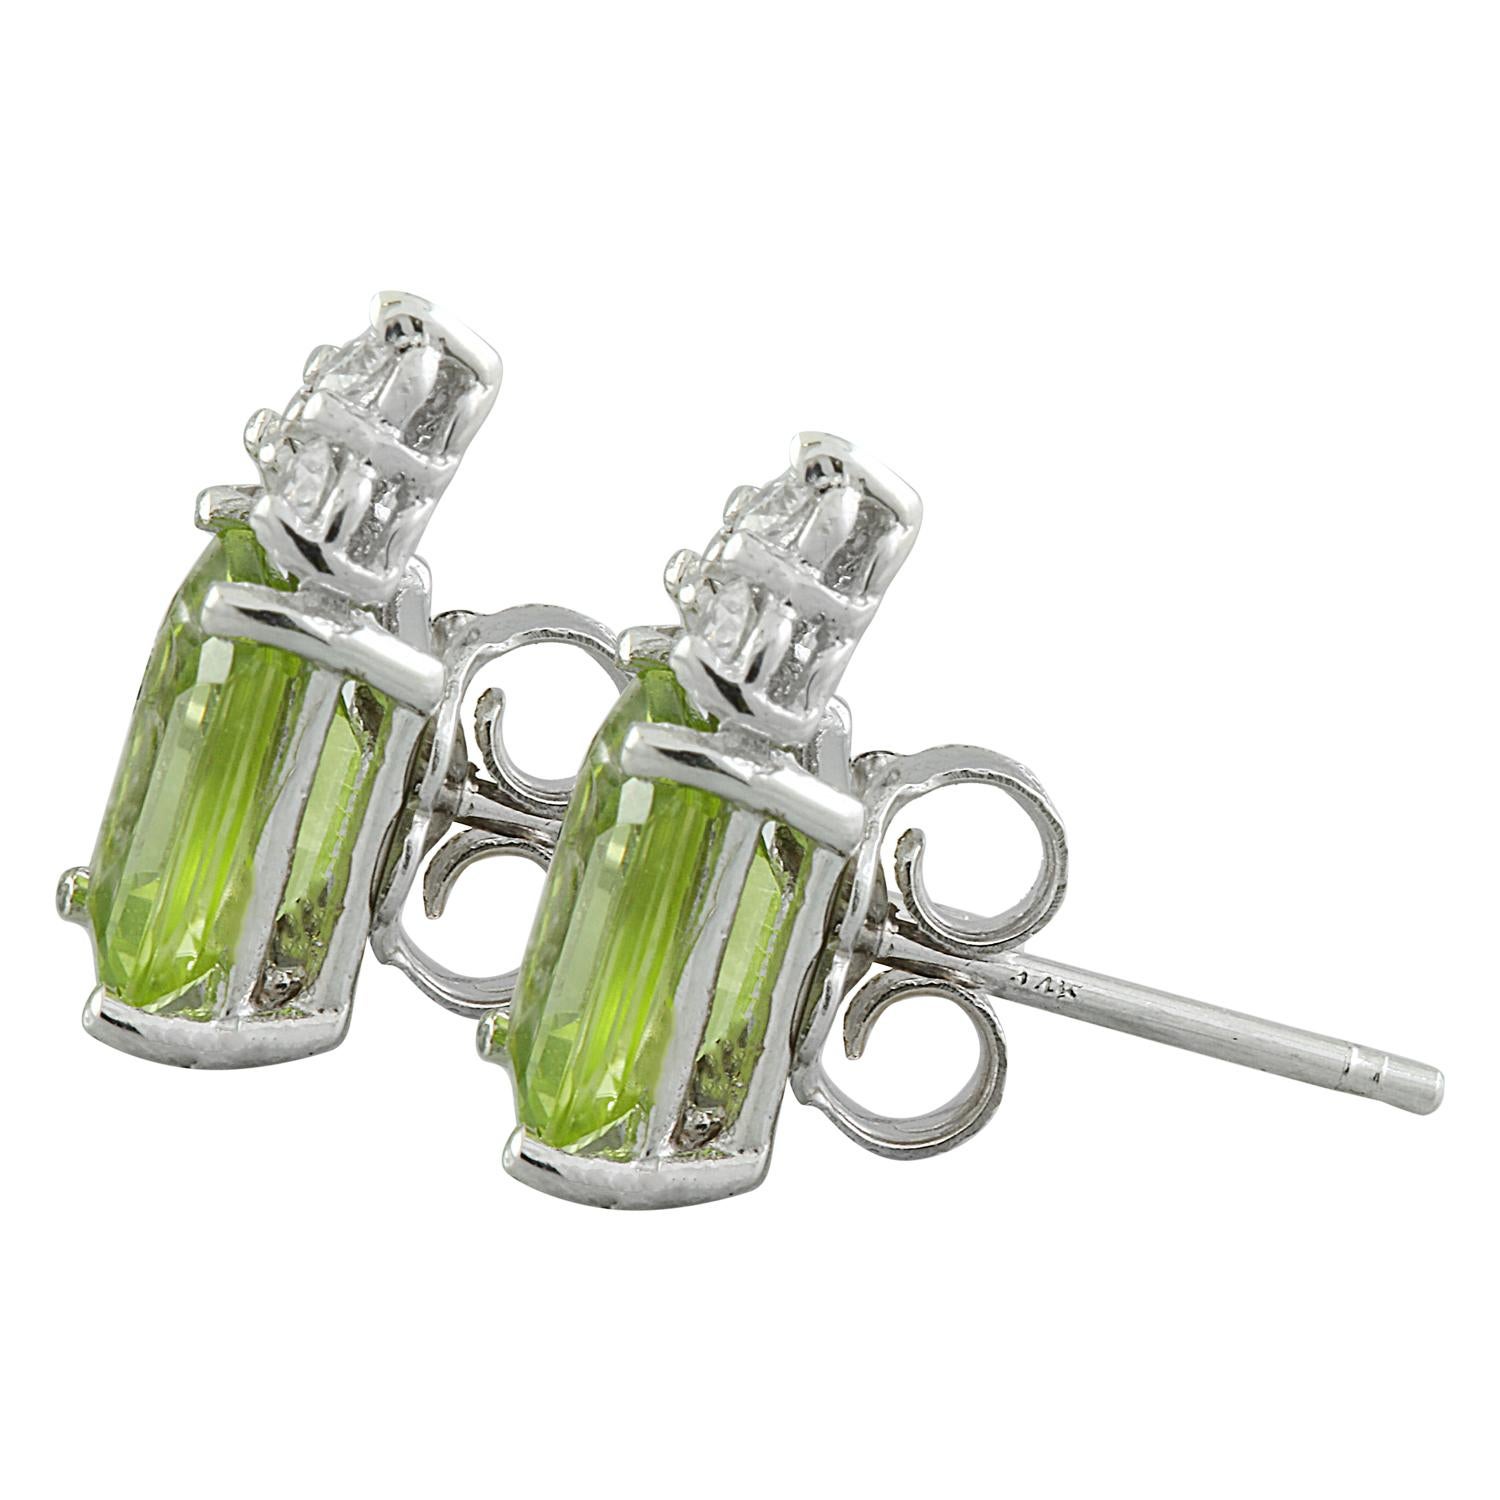 Natural Peridot Diamond Earrings In 14 Karat White Gold In New Condition For Sale In Los Angeles, CA